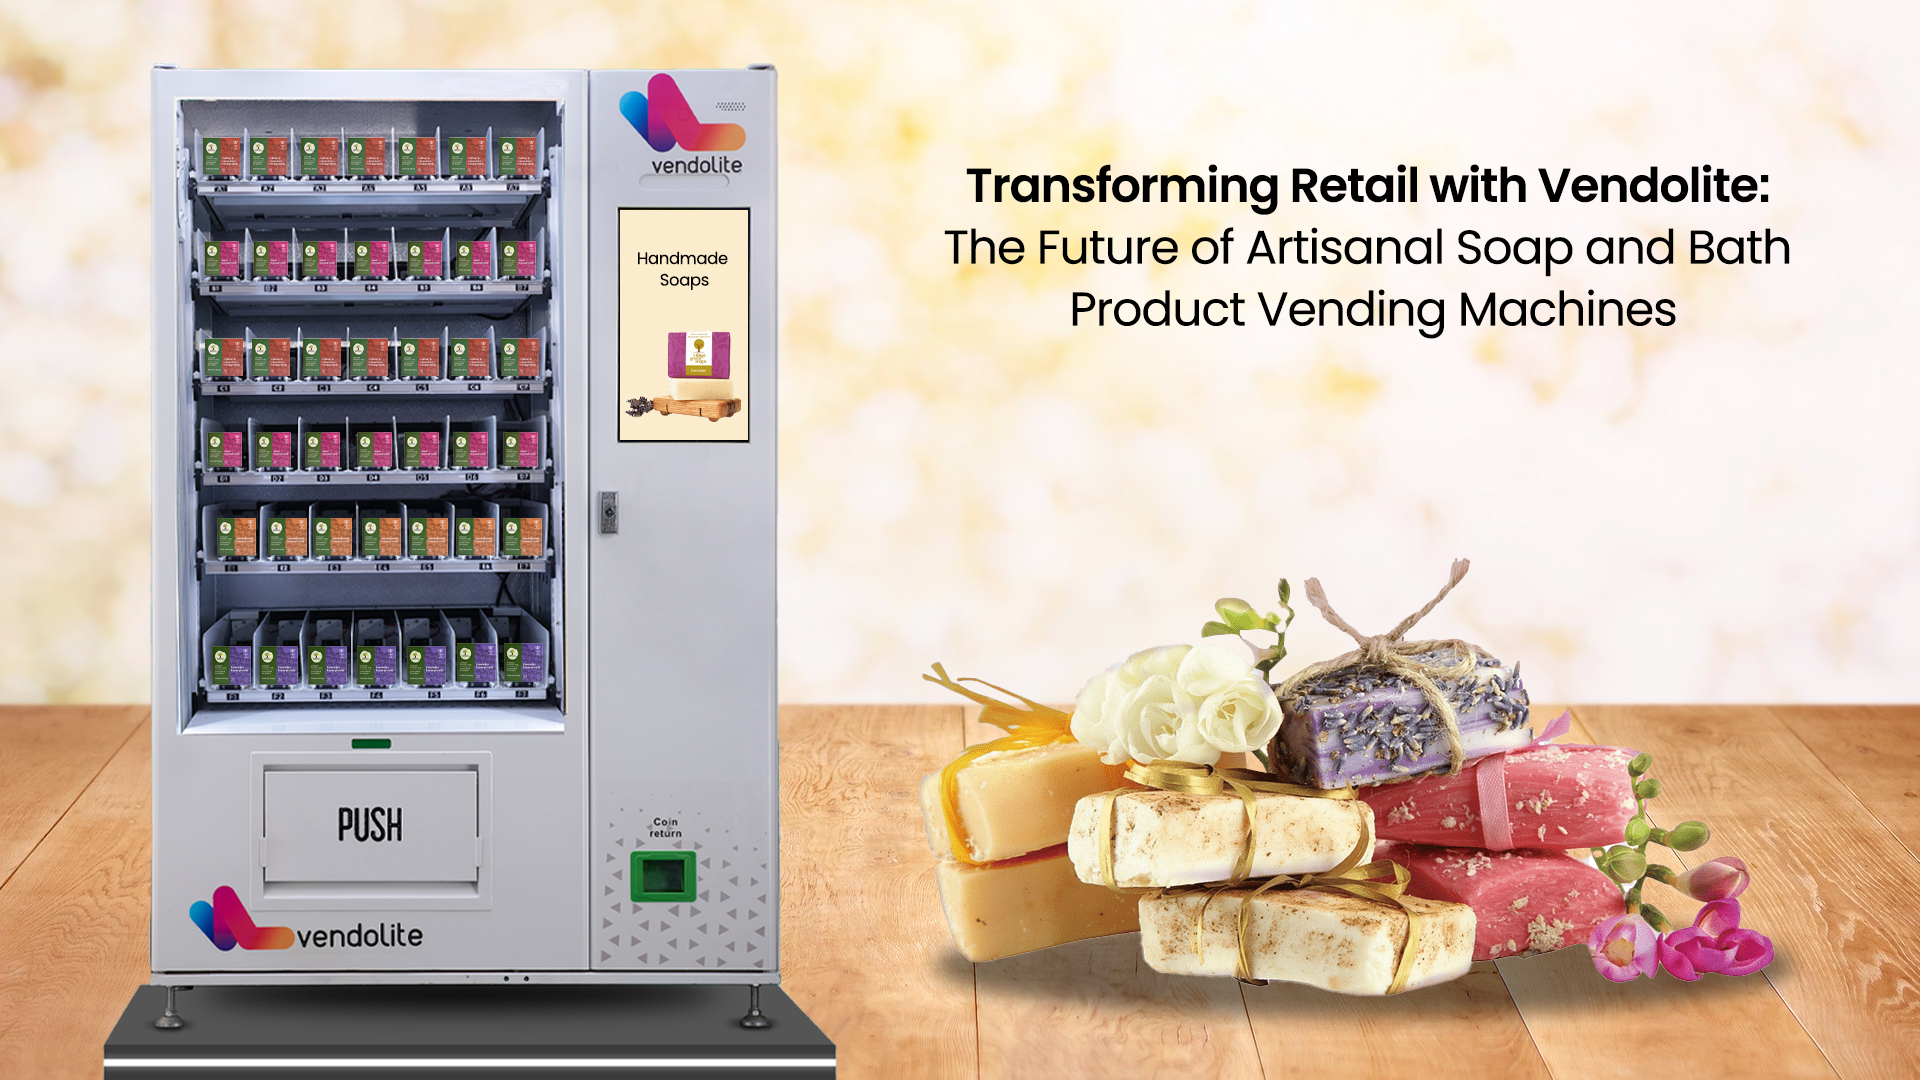 Transforming Retail with Vendolite: The Future of Artisanal Soap and Bath Product Vending Machines